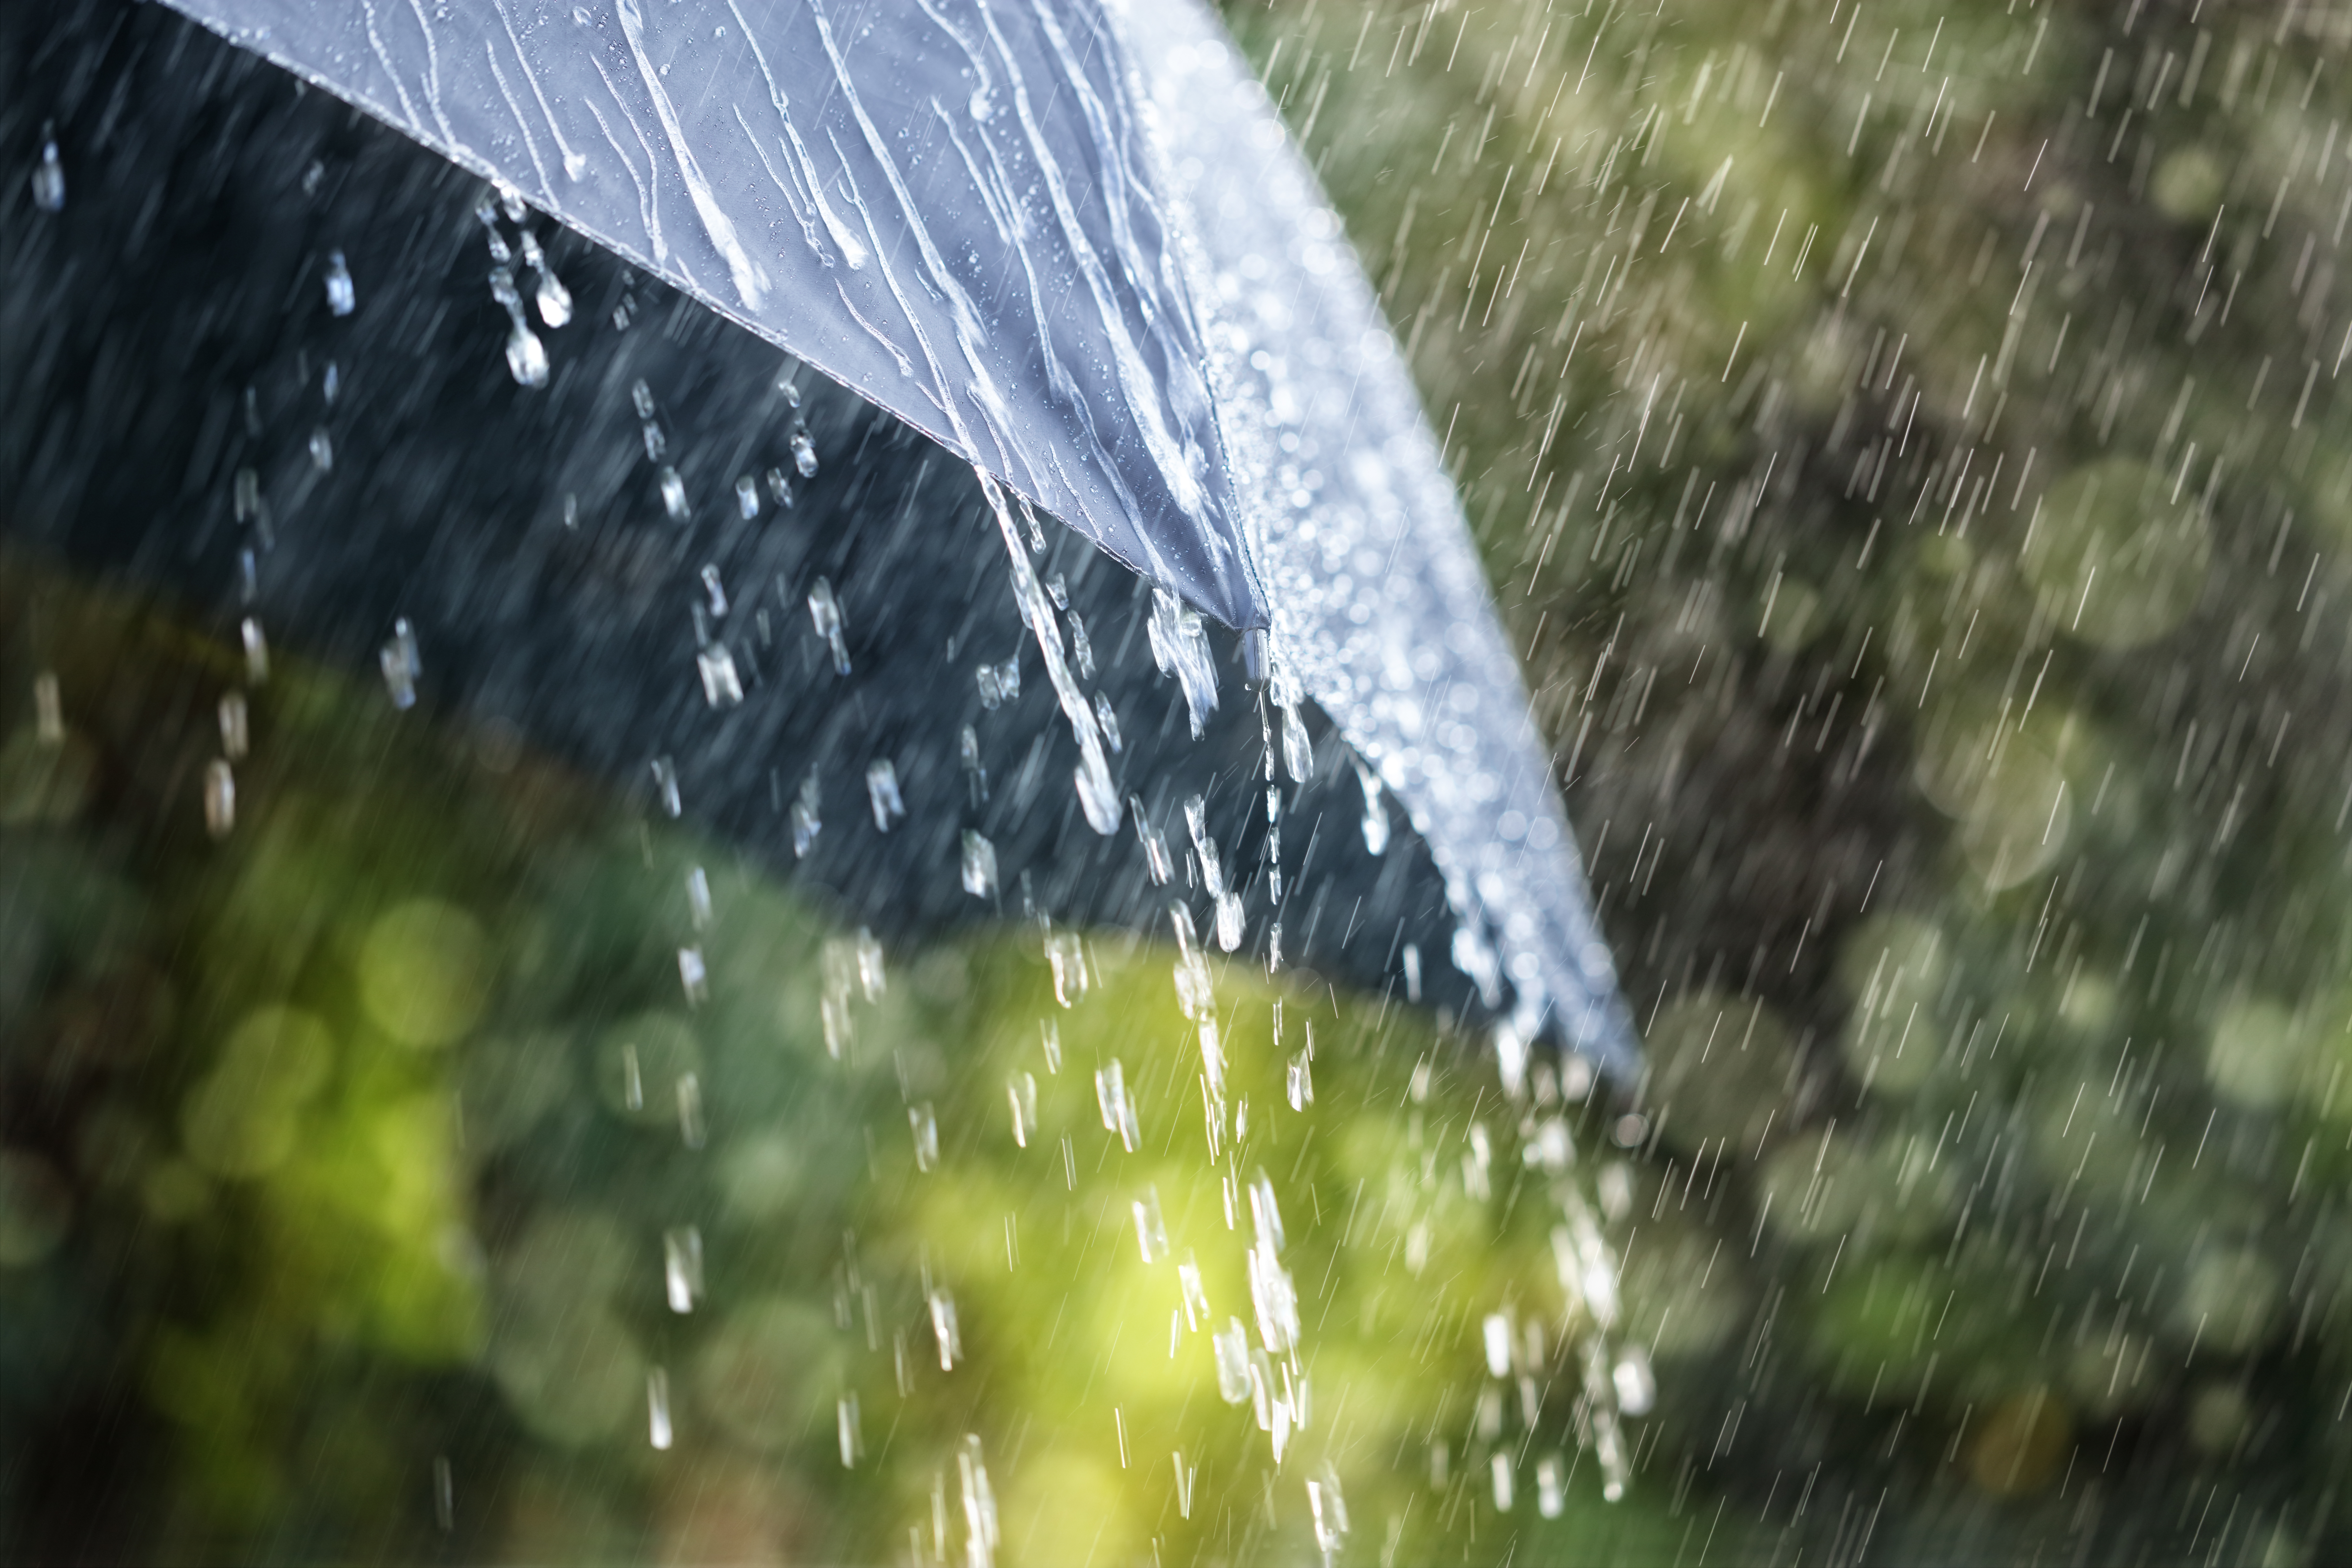 Heavy Rain Coming To The Fraser Valley TODAY, About 75-100 mm